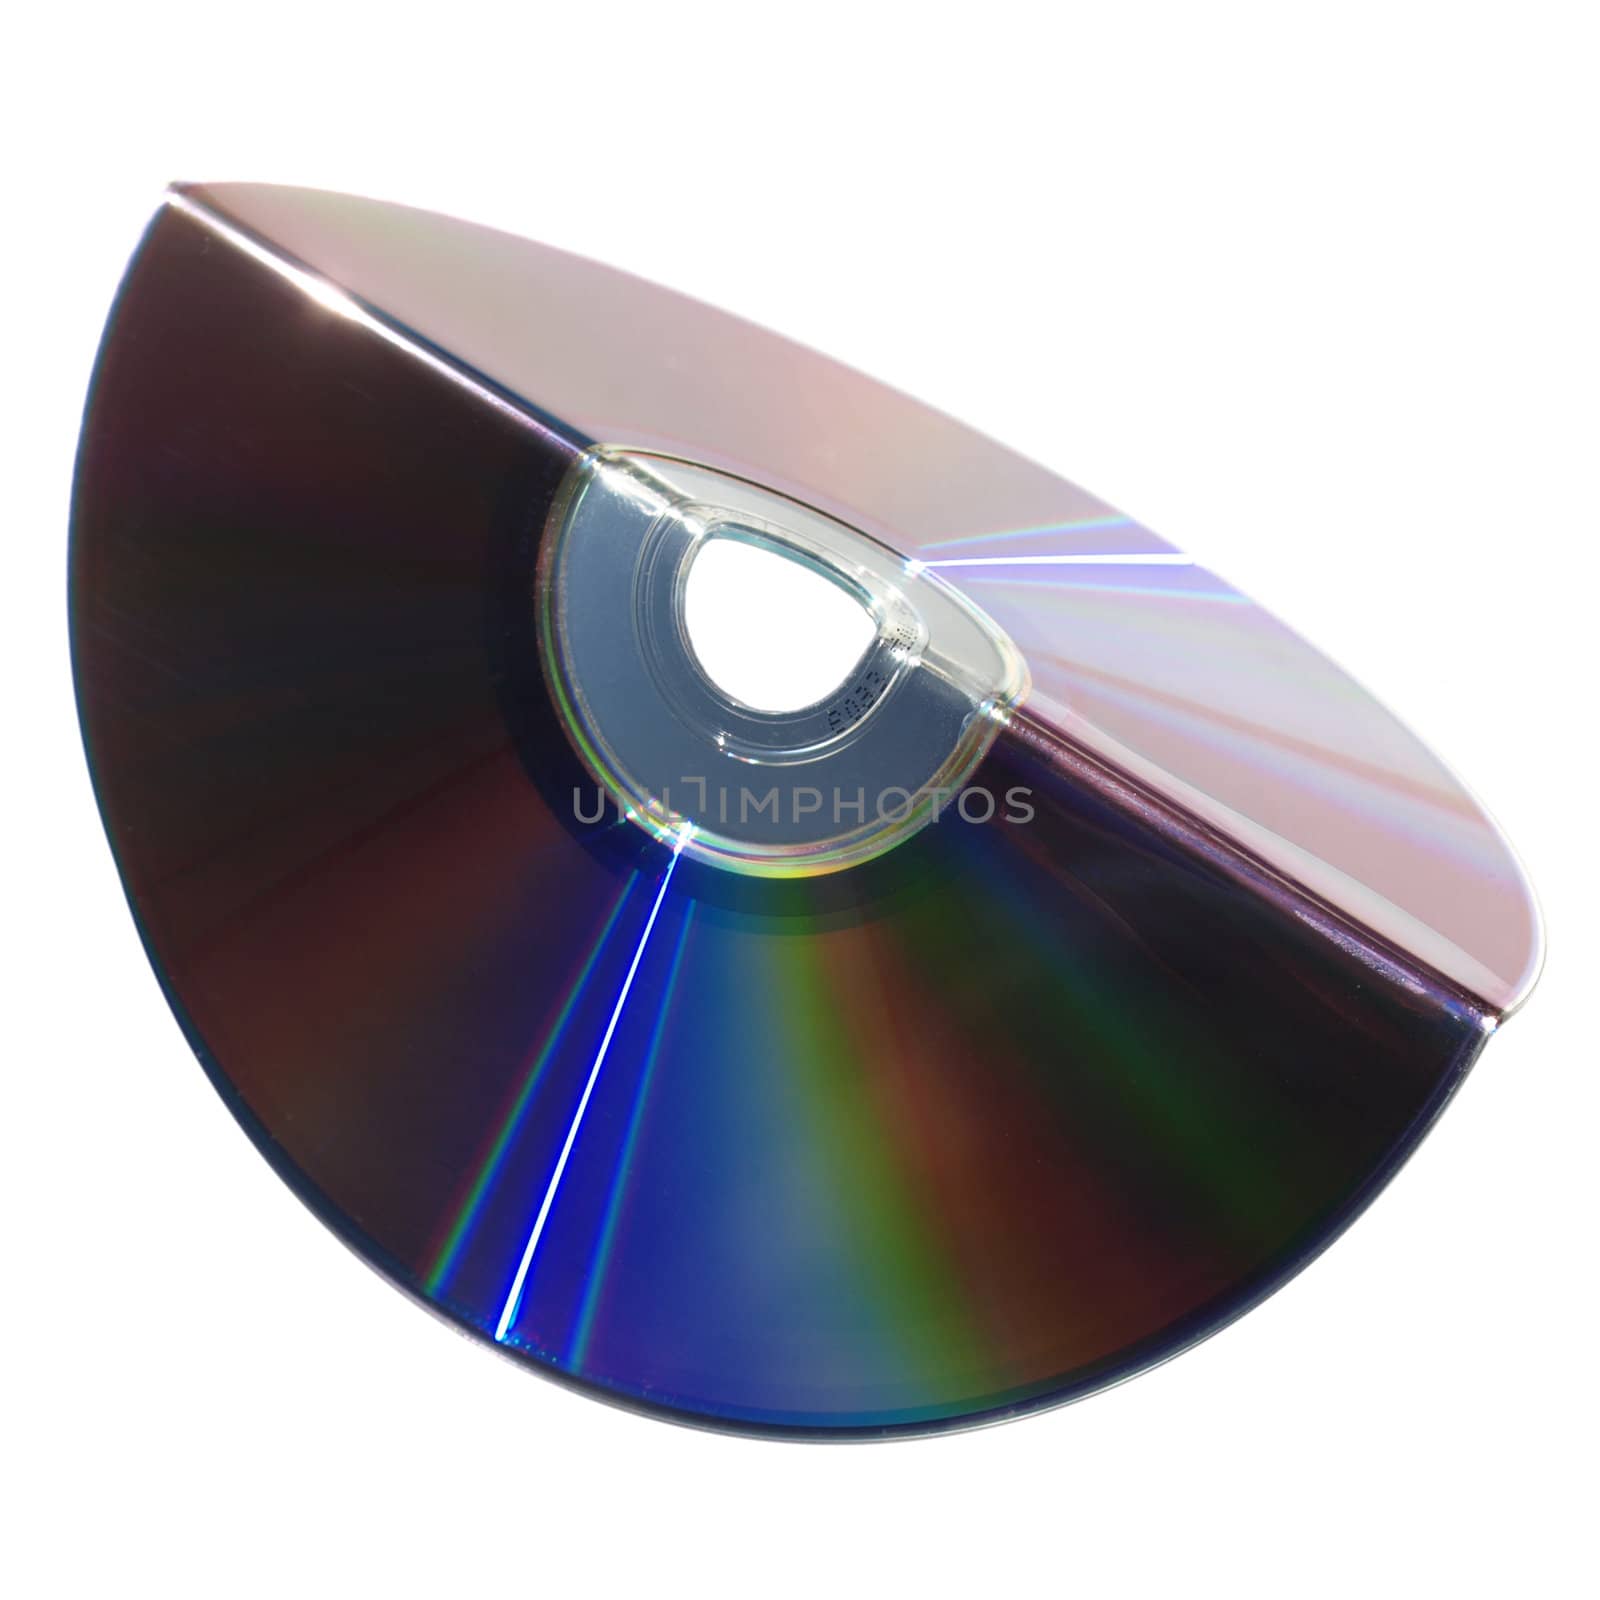 Abstract concept: soft CD bent at a right angle